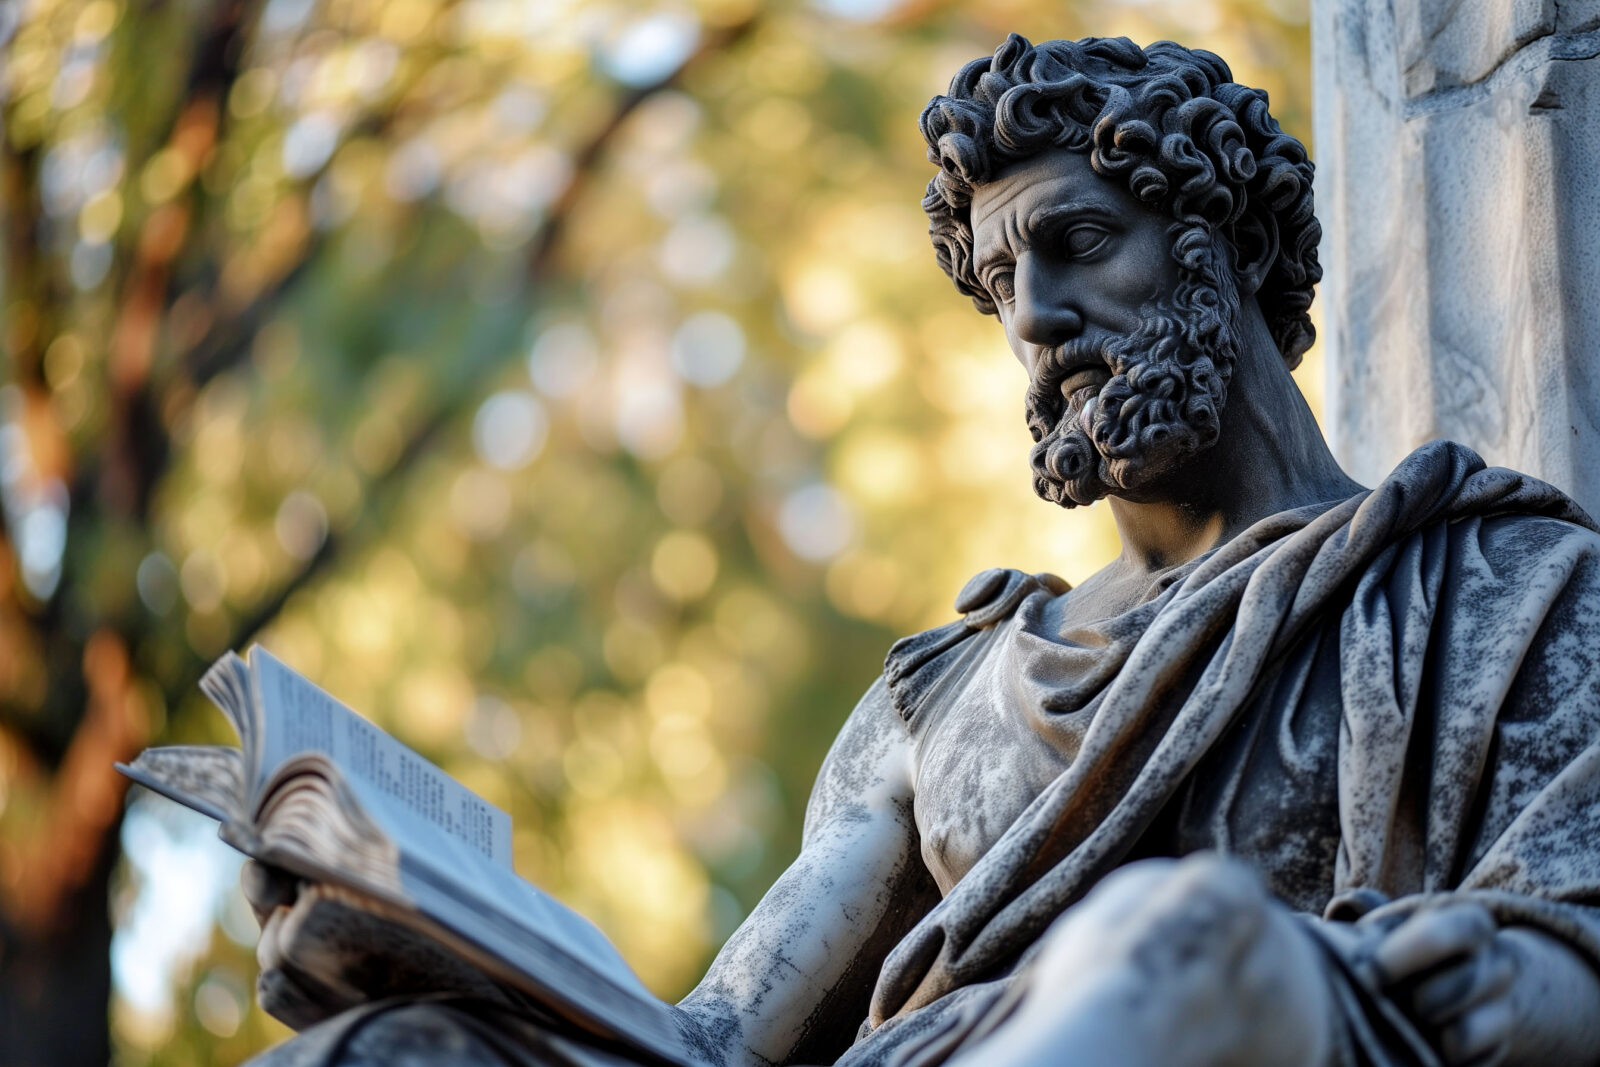 How To Read Marcus Aurelius’ Meditations (The greatest book ever written?)